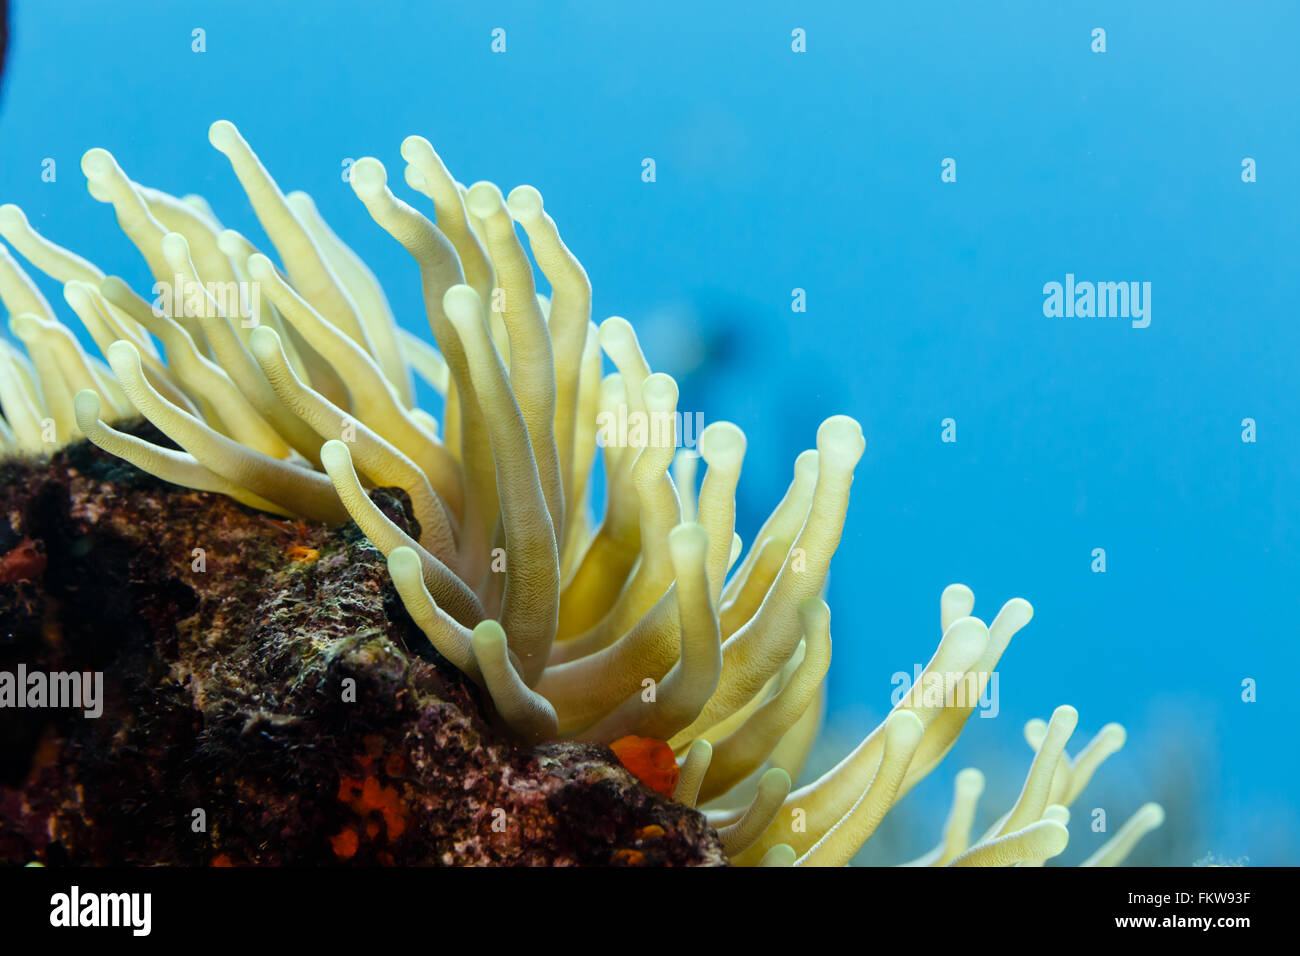 Close-up of open, yellow tentacles swaying in current, sea anemone, anthozoa actinaria, with orange coral around Stock Photo